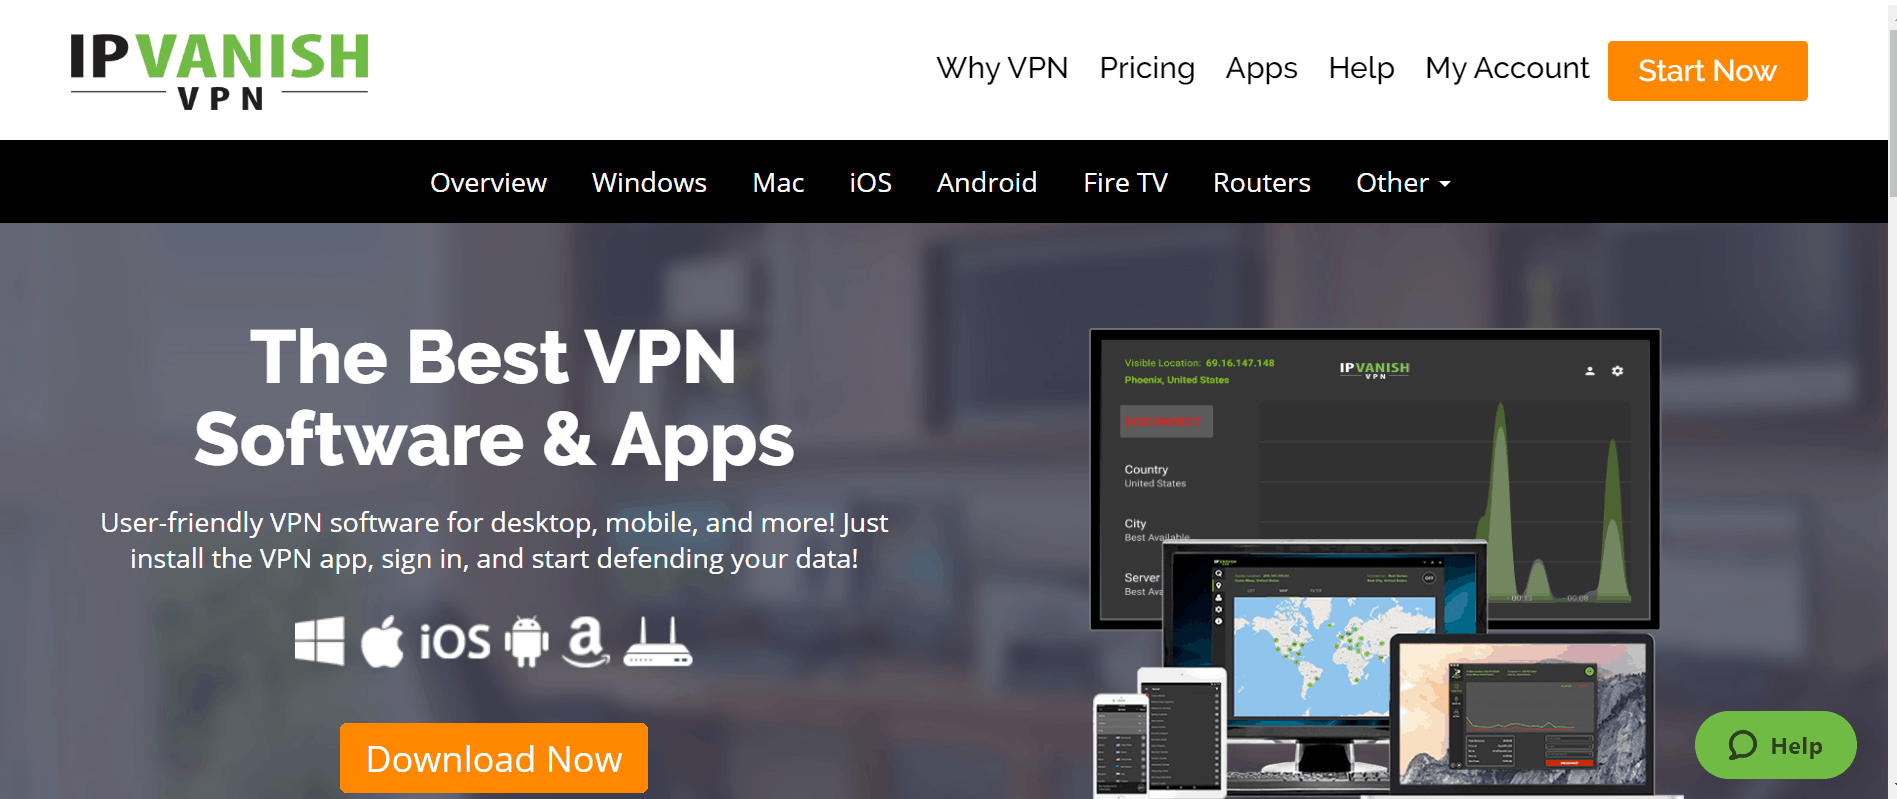 ipvanish unable to connect to the vpn server 87